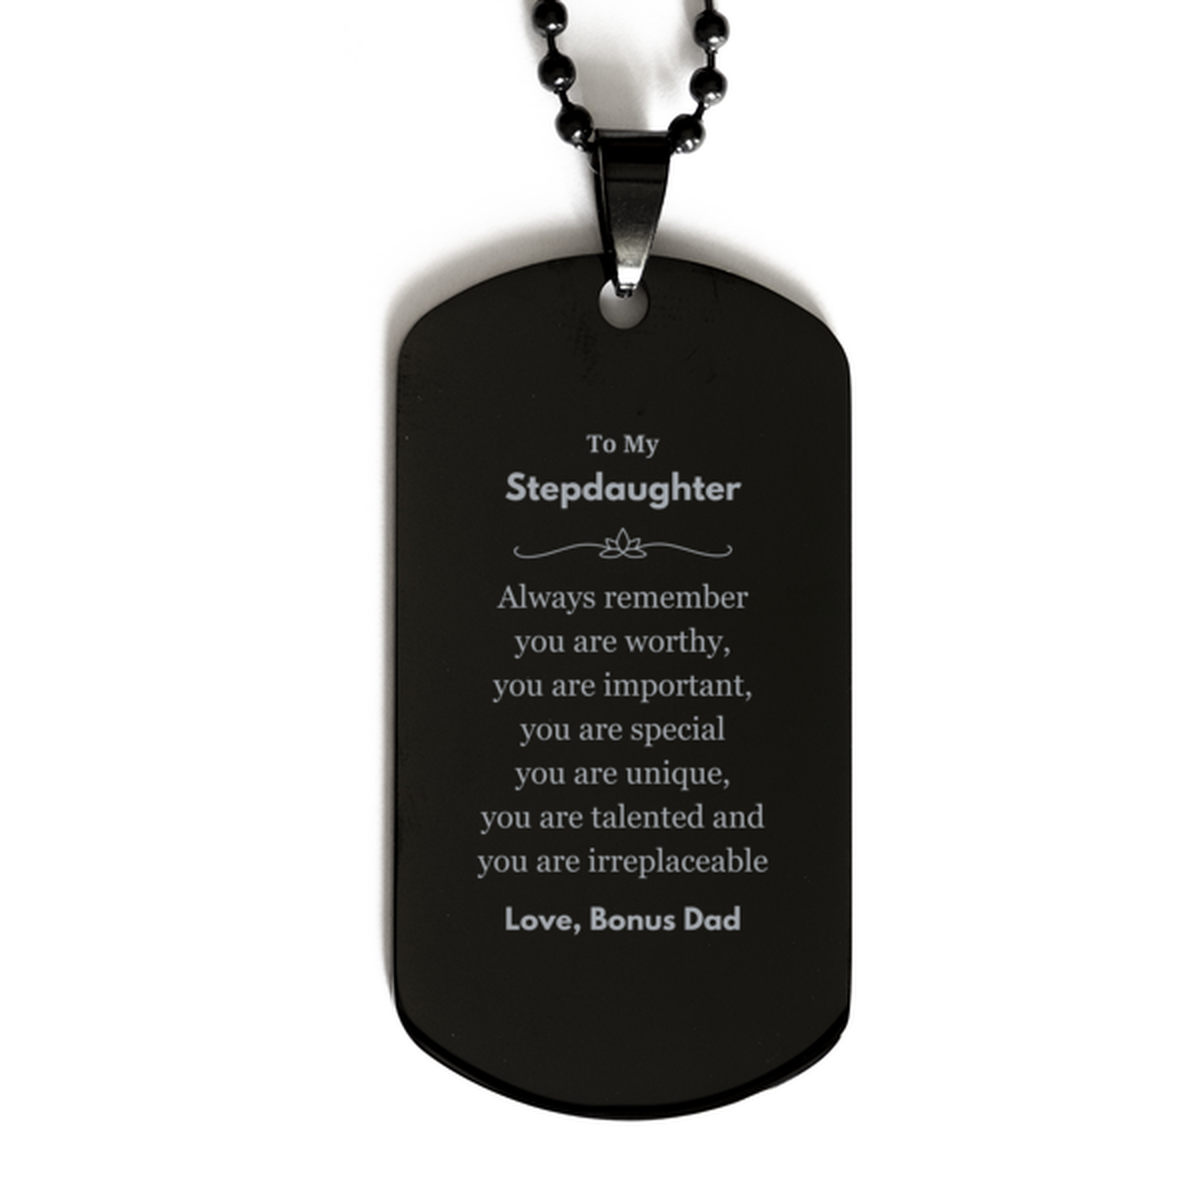 Stepdaughter Birthday Gifts from Bonus Dad, Inspirational Black Dog Tag for Stepdaughter Christmas Graduation Gifts for Stepdaughter Always remember you are worthy, you are important. Love, Bonus Dad